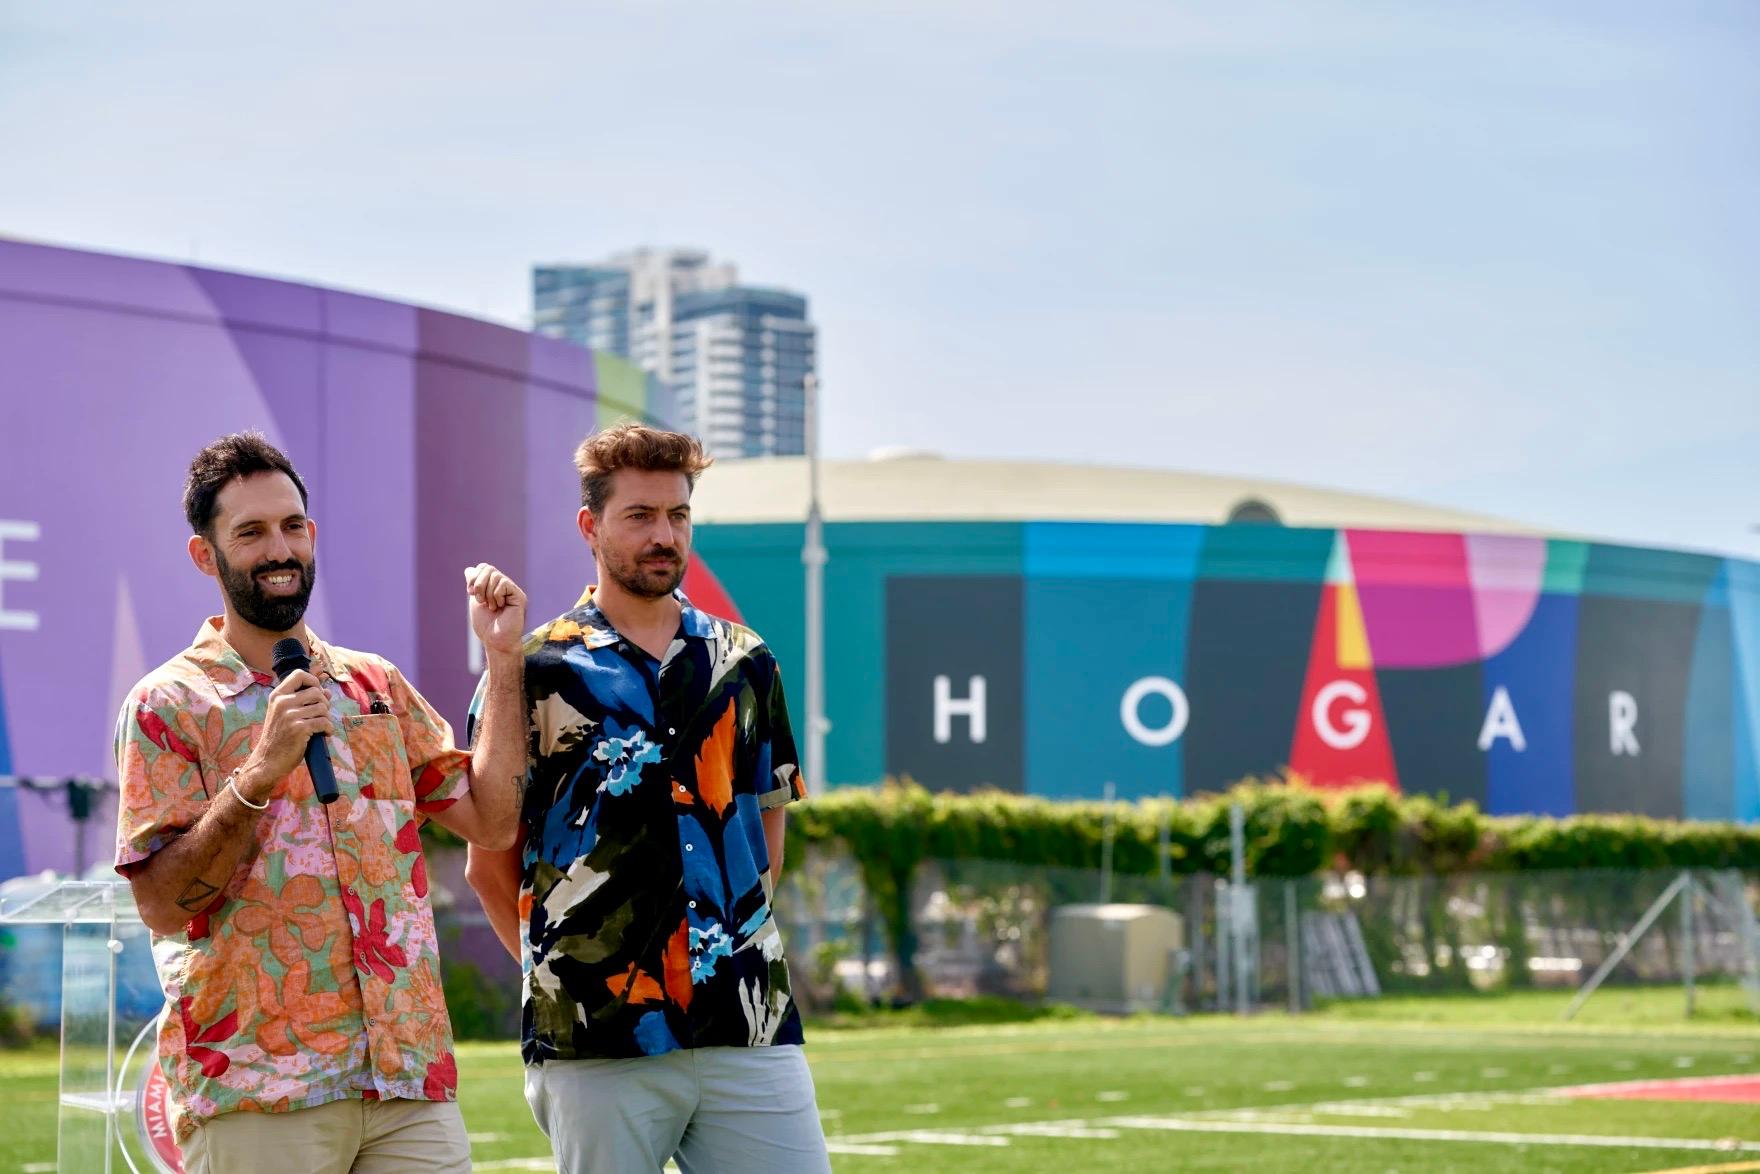 Two men in colorful shirts standing infront of color murals